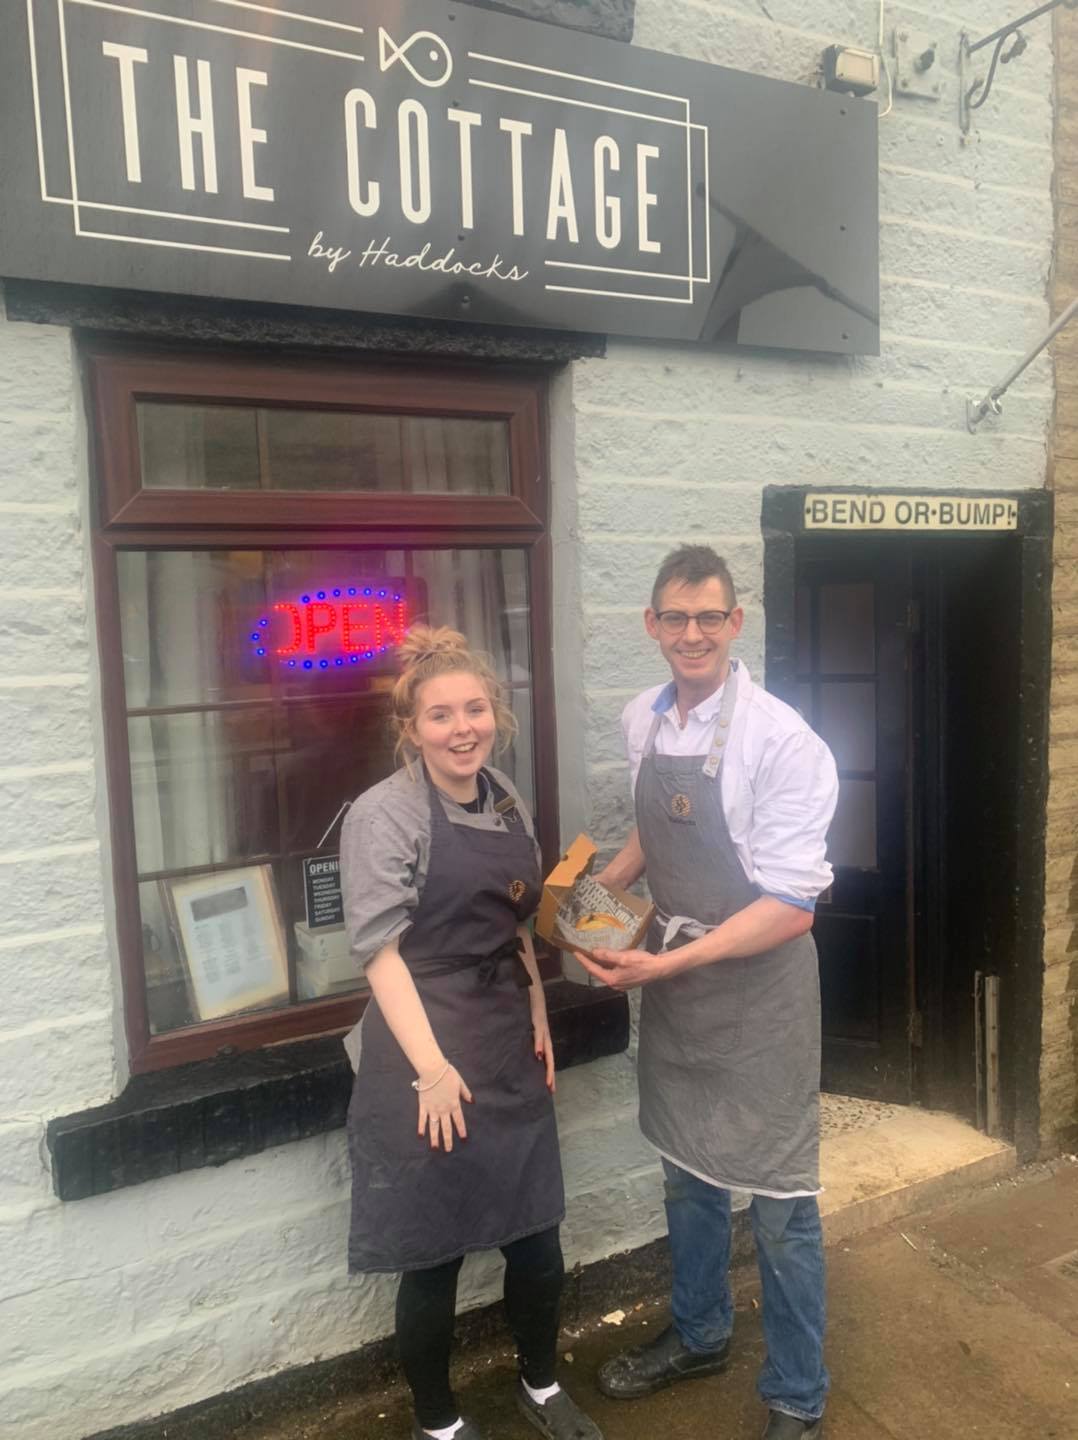 Chris Haddock and employee Rayanne outside The Cottage by Haddocks in Rawtenstall